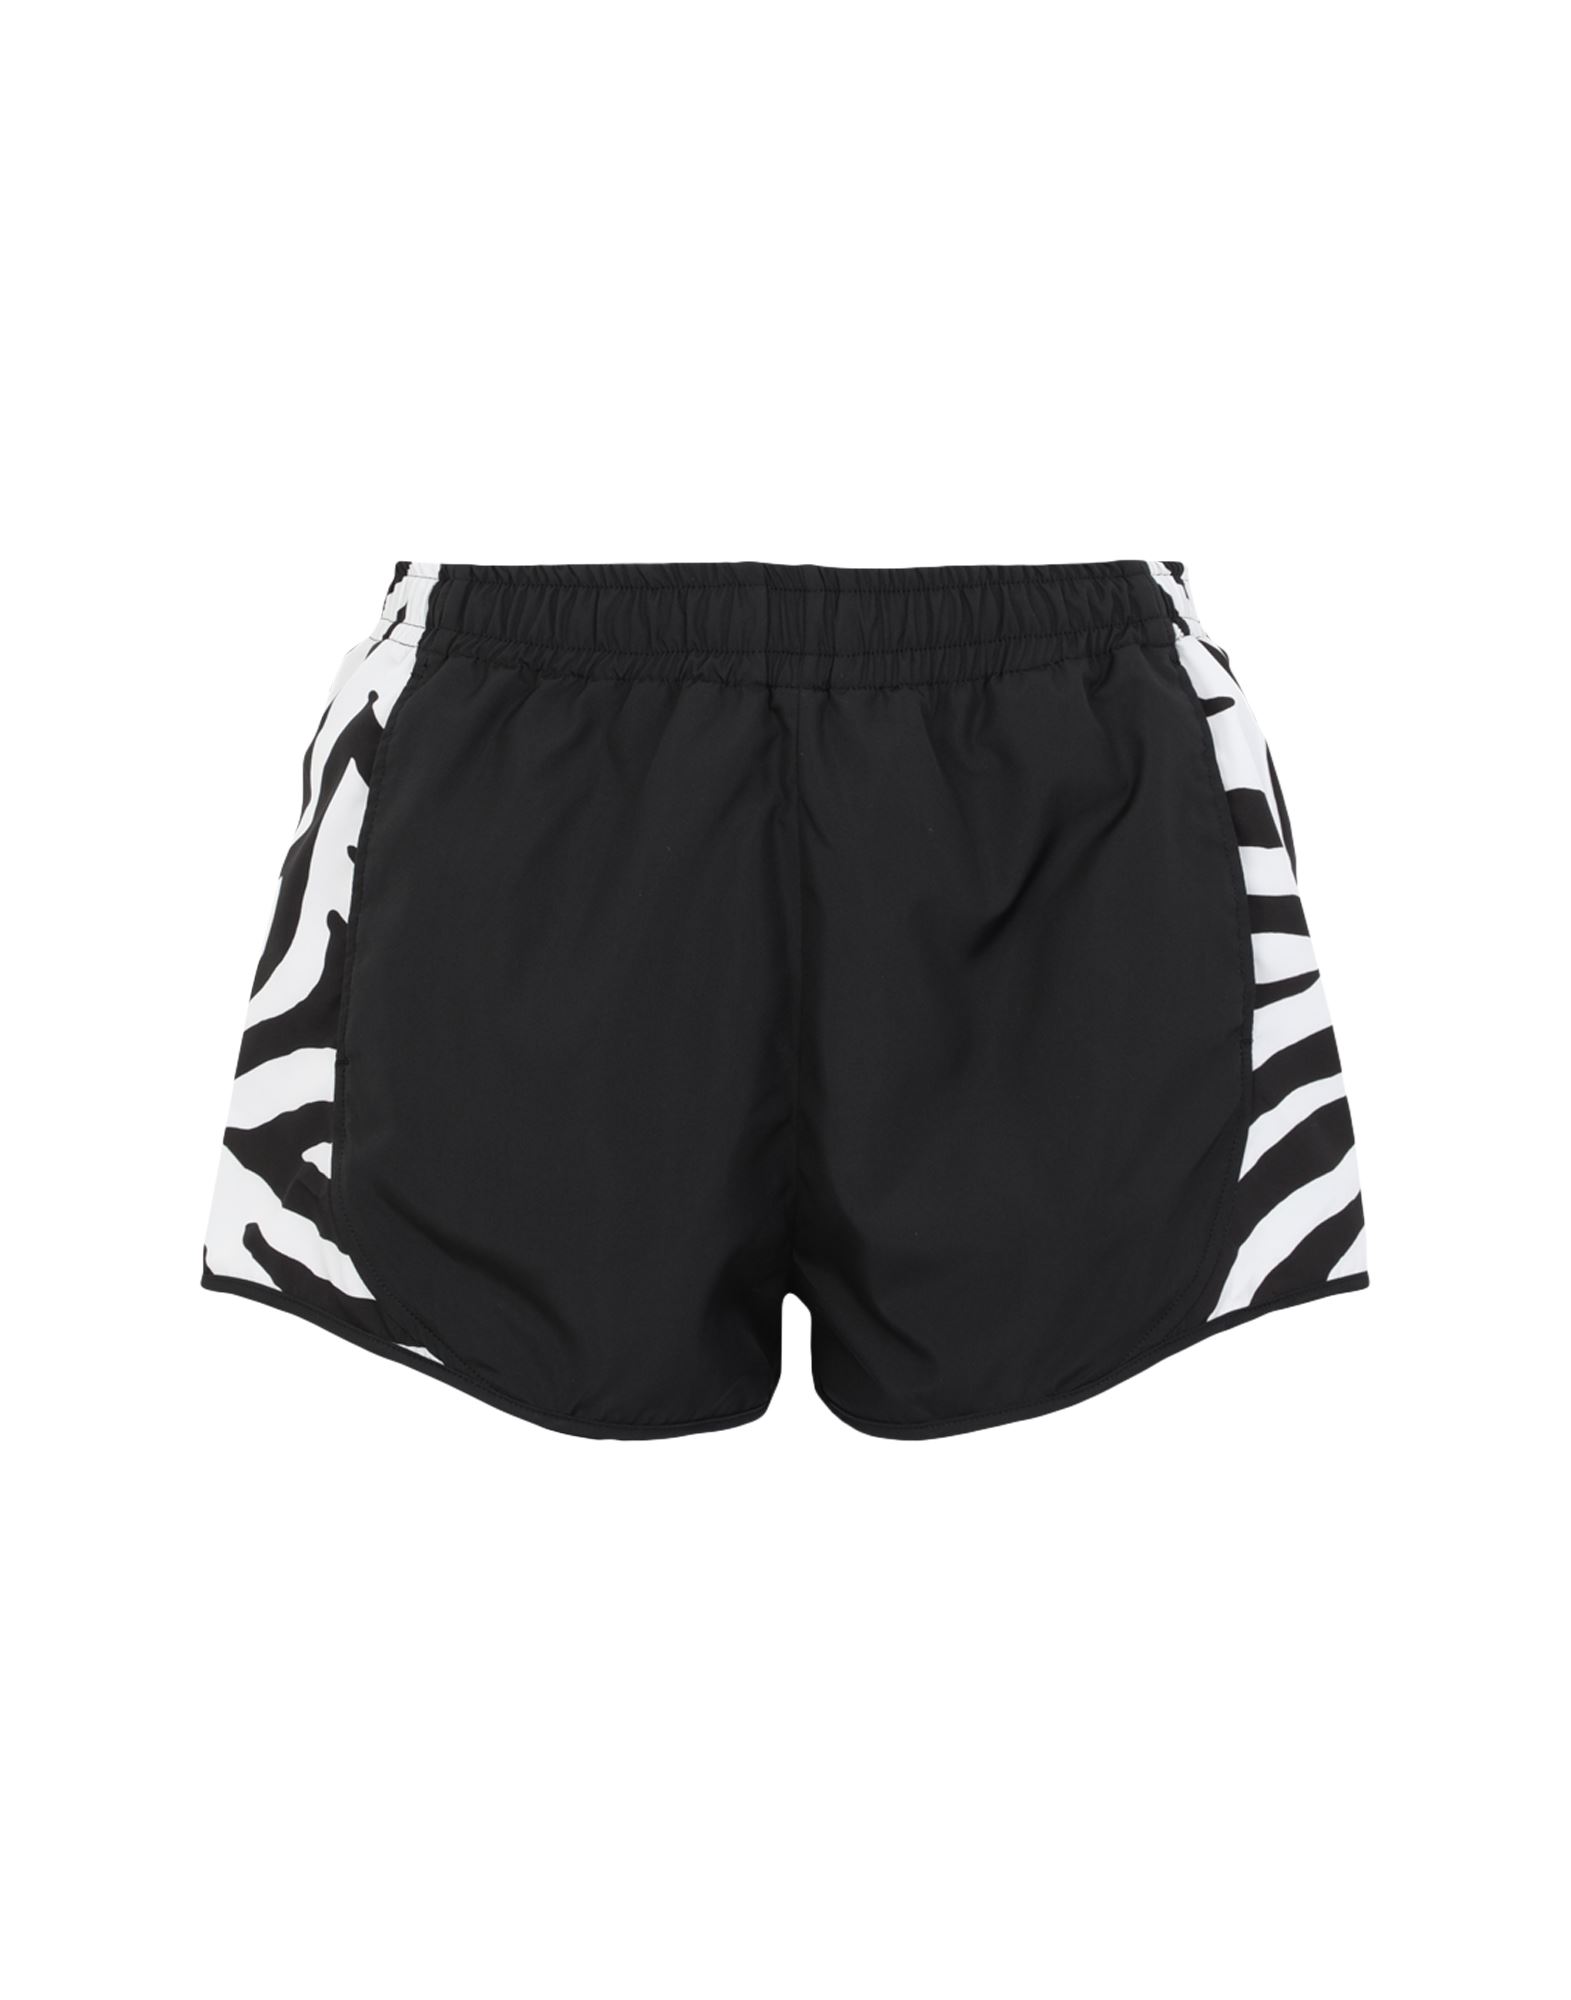 Shop Redemption Athletix Woman Shorts & Bermuda Shorts Black Size L Recycled Polyester